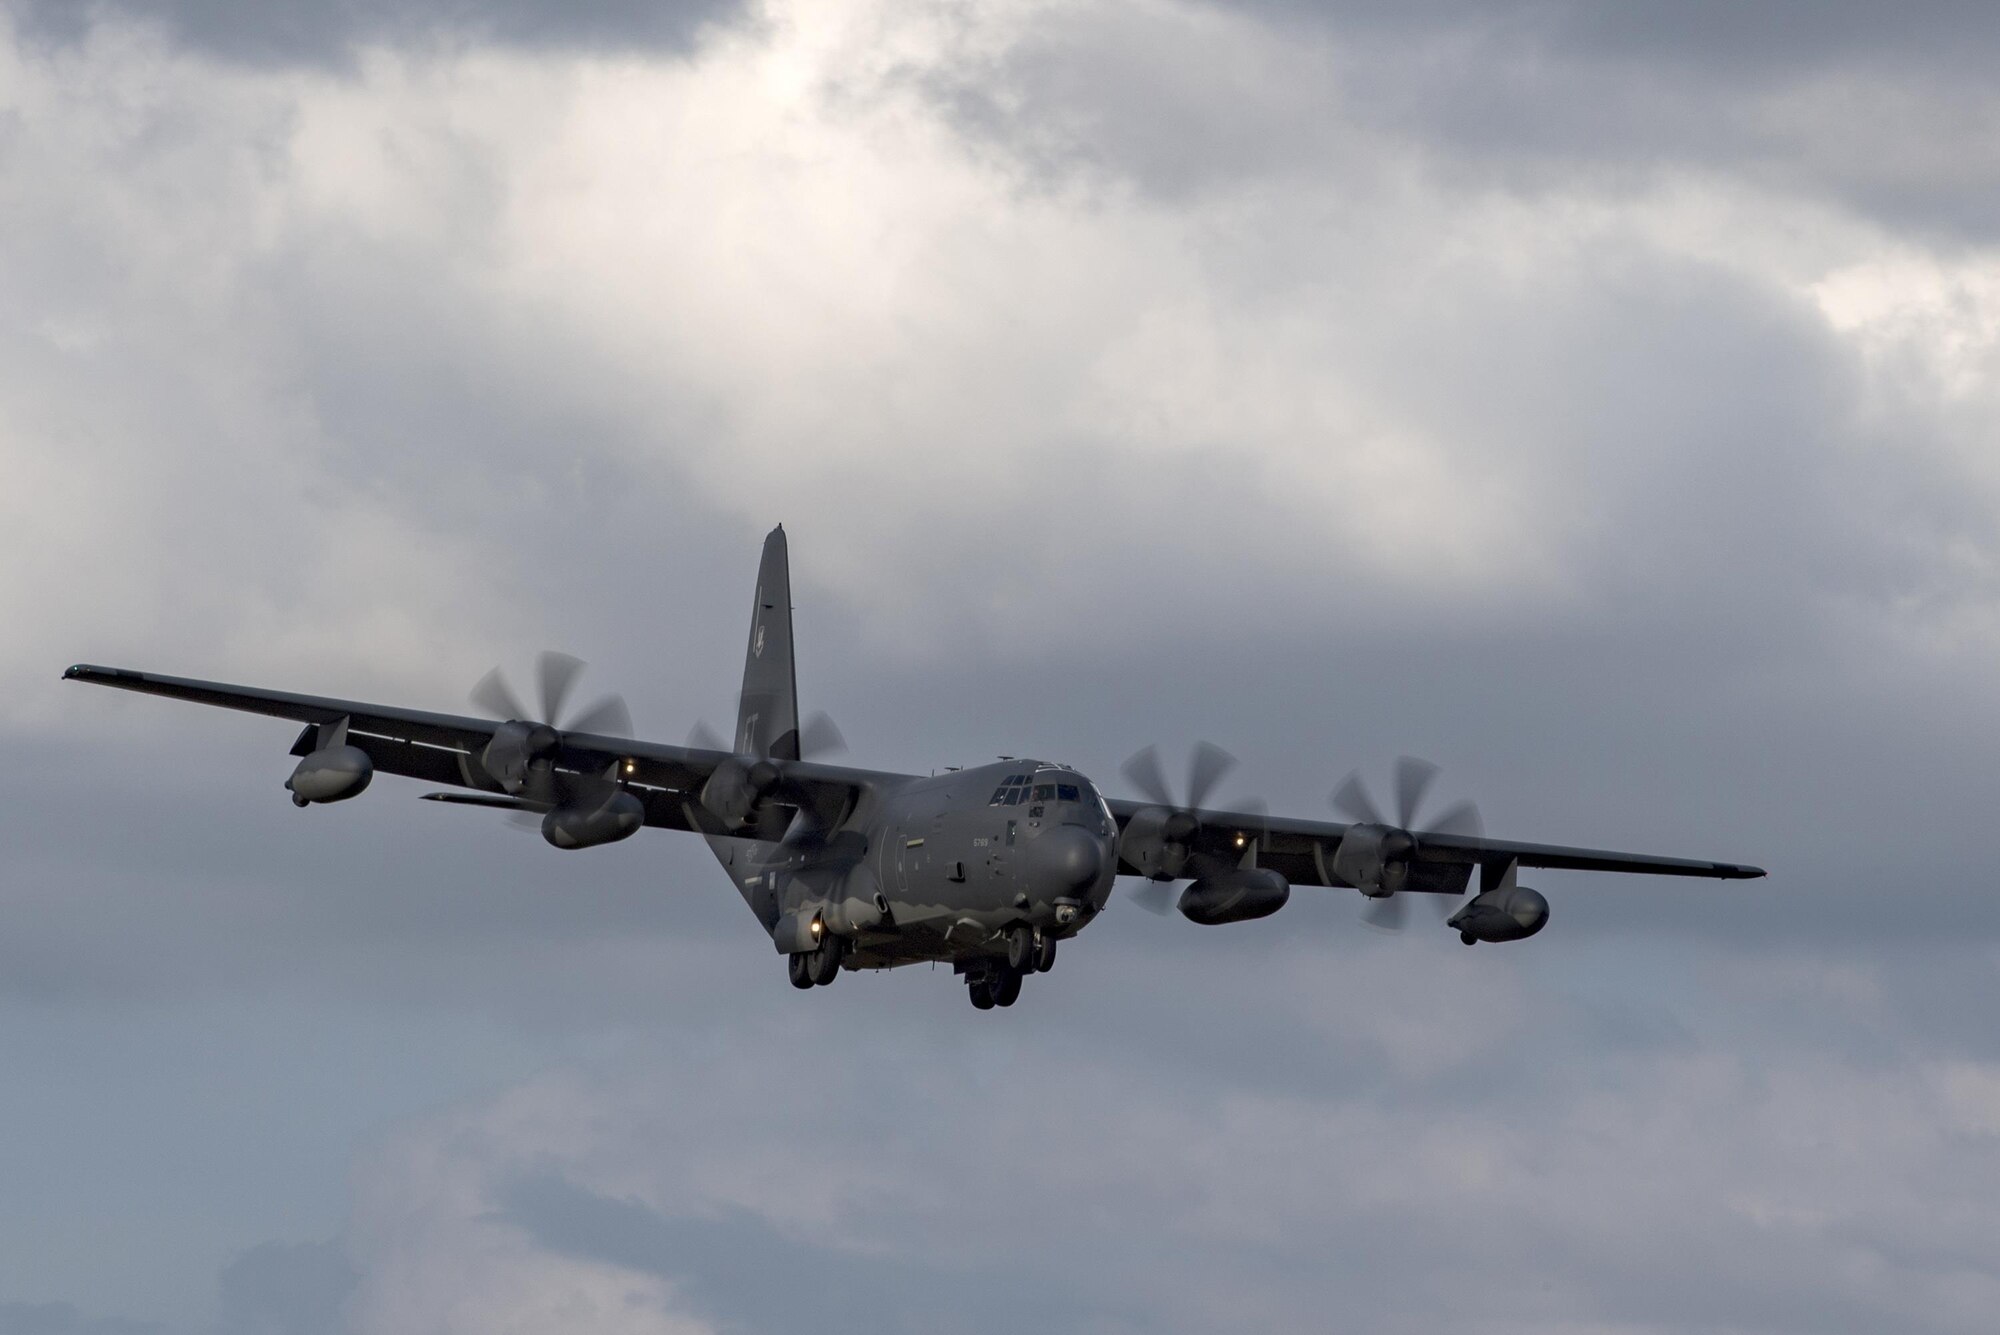 An HC-130J Combat King II from the 71st Rescue Squadron prepares to land during a rapid-rescue exercise, Nov. 2, 2016 in Marianna, Fla. The exercise was designed to test the 347th Rescue Group’s ability to rapidly deploy, plan and execute rescue operations in combat environments. The exercise included HC-130J Combat King IIs, HH-60G Pave Hawks, C-17 Globemaster IIIs, A-10C Thunderbolt IIs, E-8C Joint Stars, pararescuemen and maintenance, intelligence and support personnel. (U.S. Air Force photo by Tech. Sgt. Zachary Wolf)